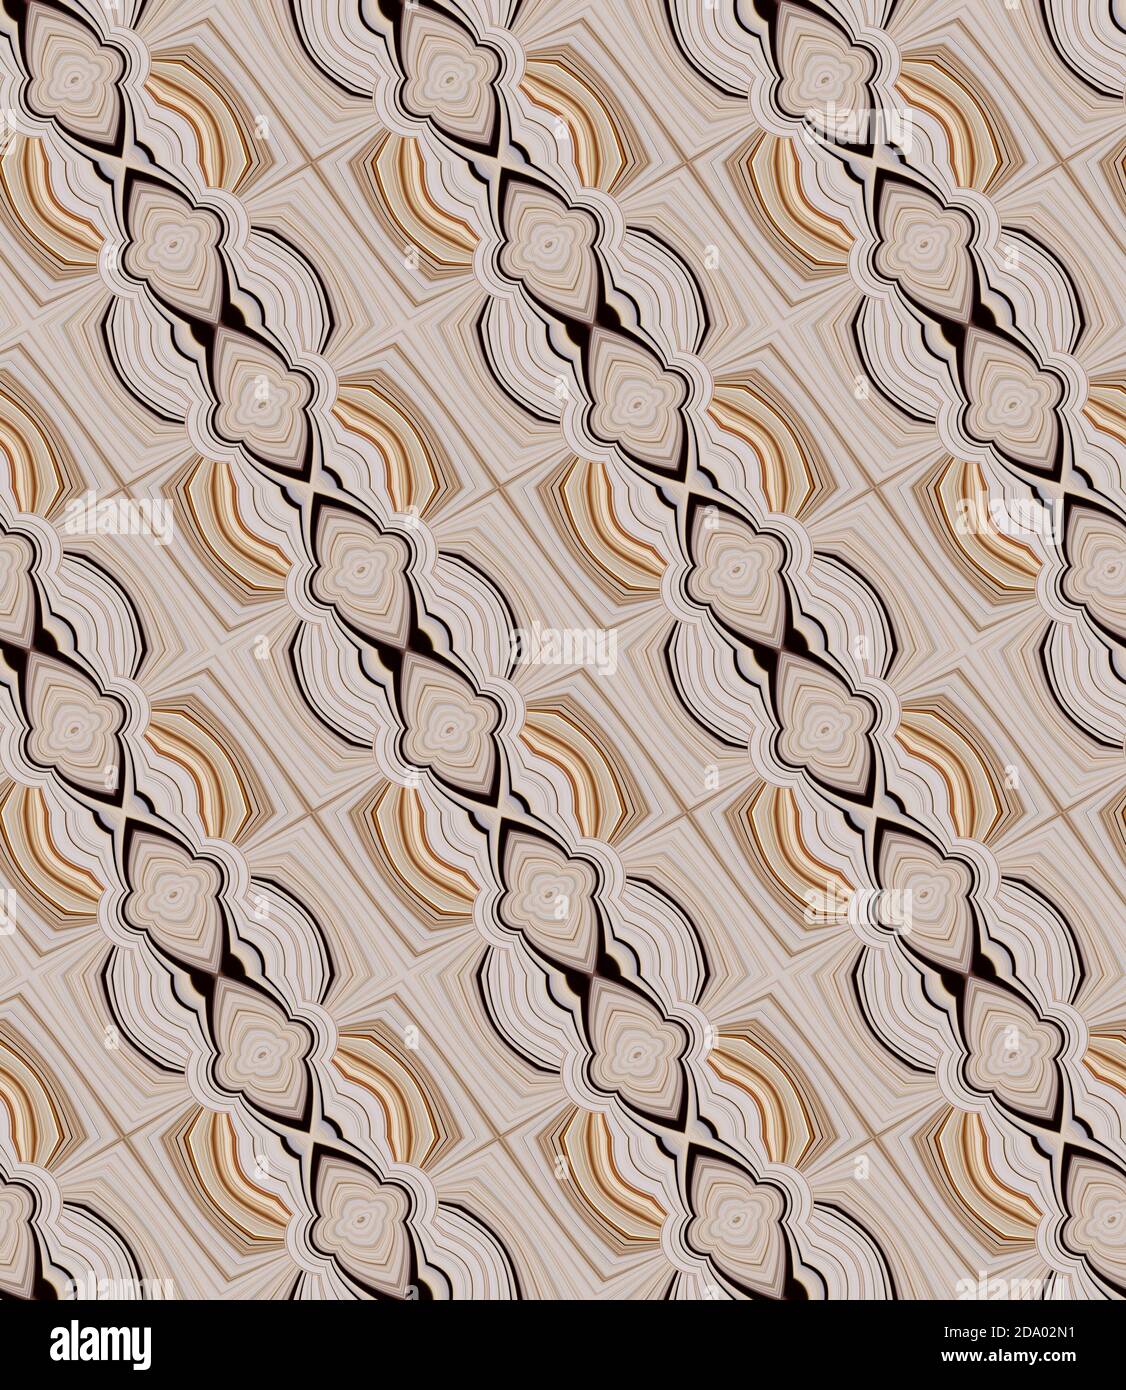 Soft abstract seamless design pattern. Shades of brown. Design for decor, prints, textile, furniture, cloth, digital. Stock Photo